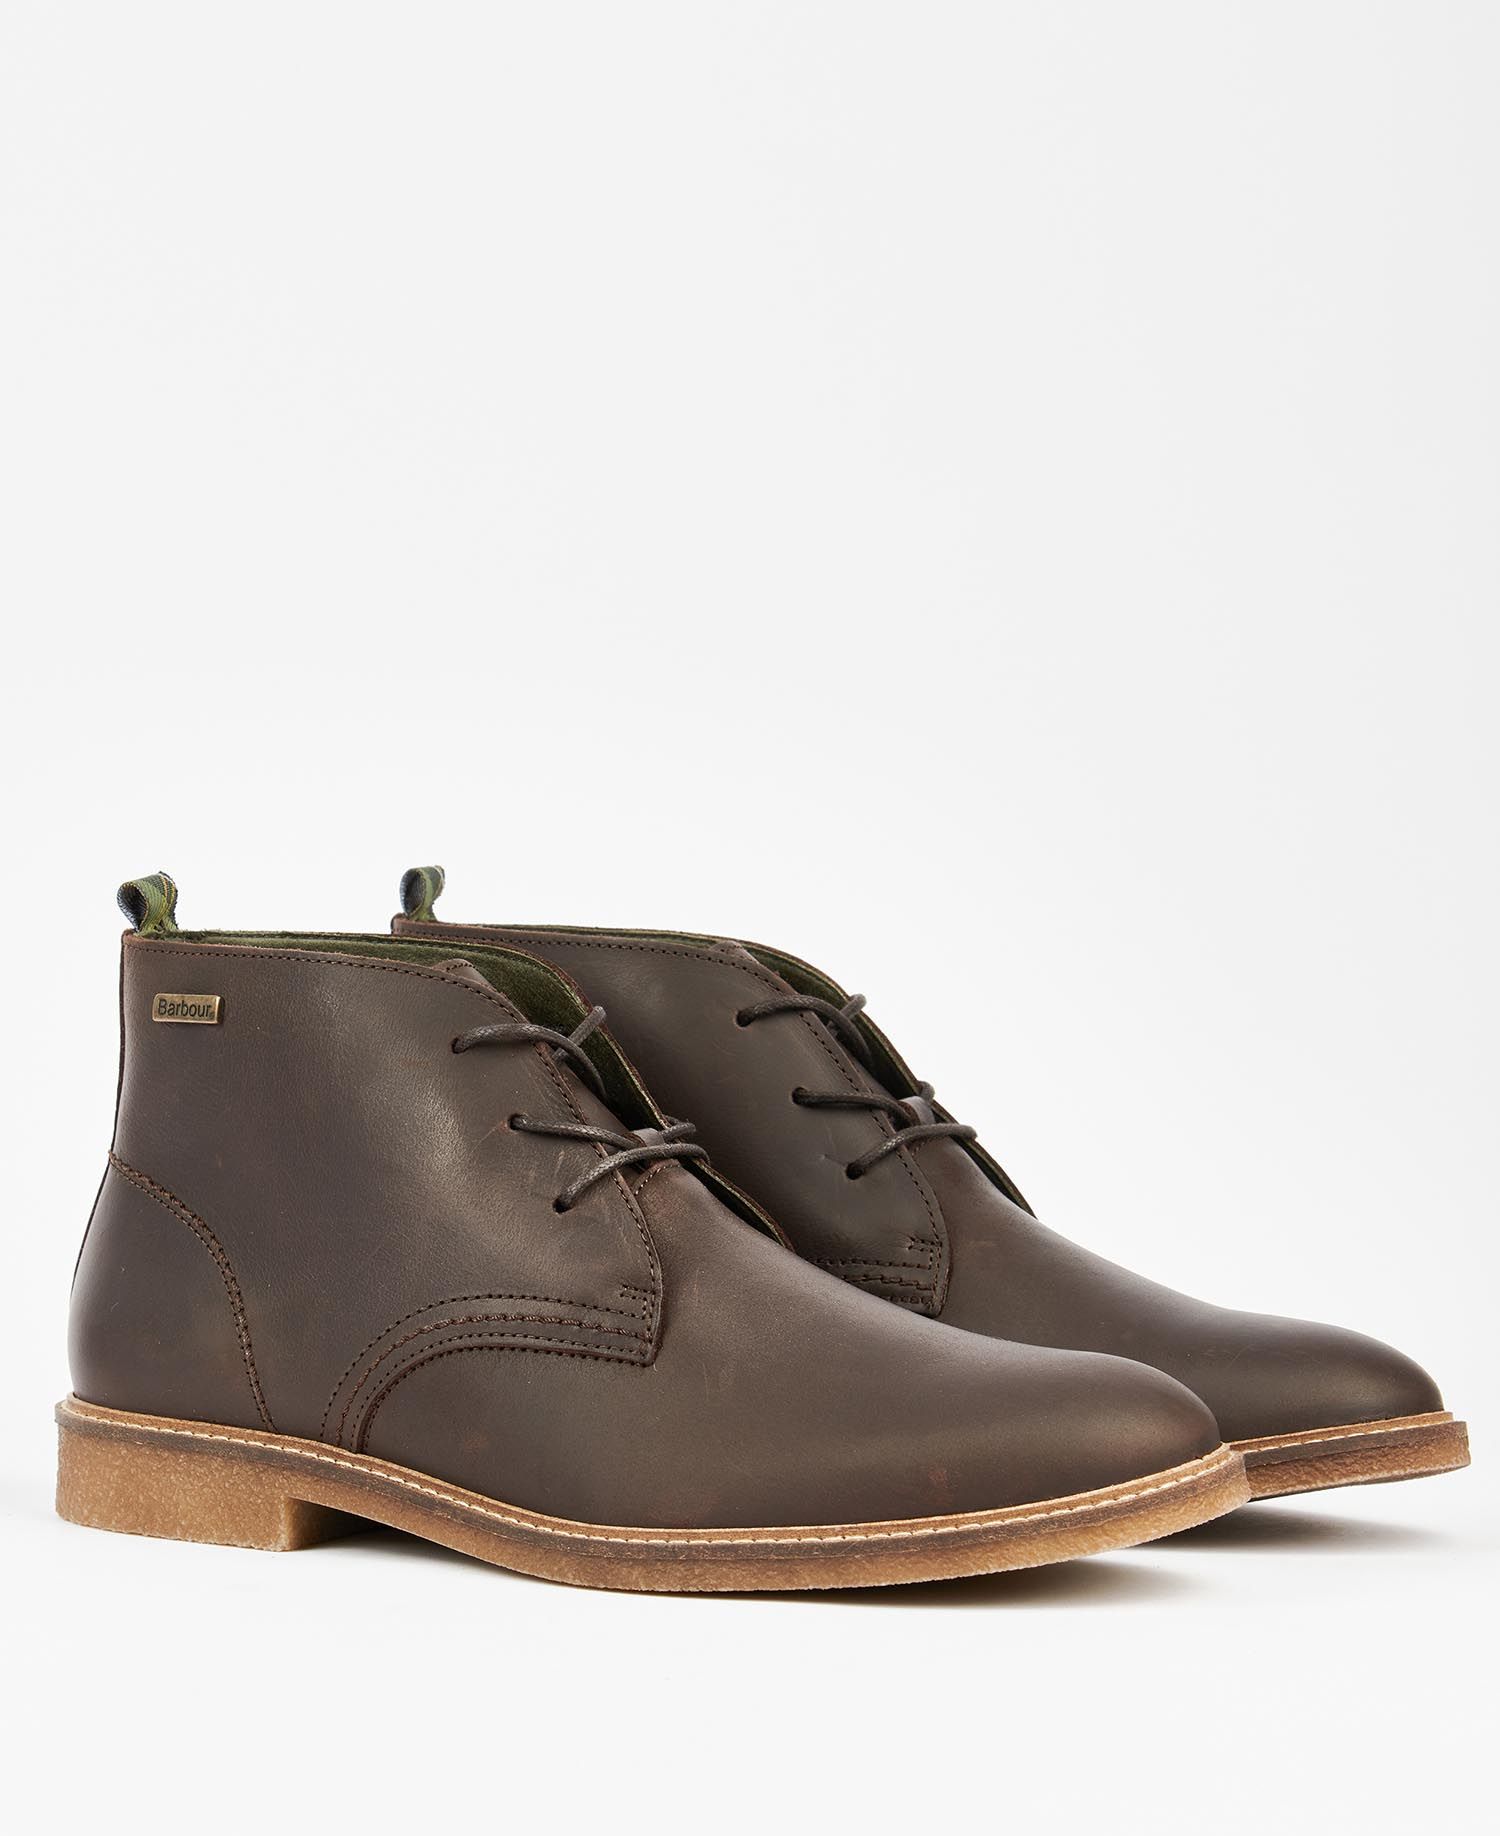 Shop the Barbour Sonoran Boots in Brown | Barbour